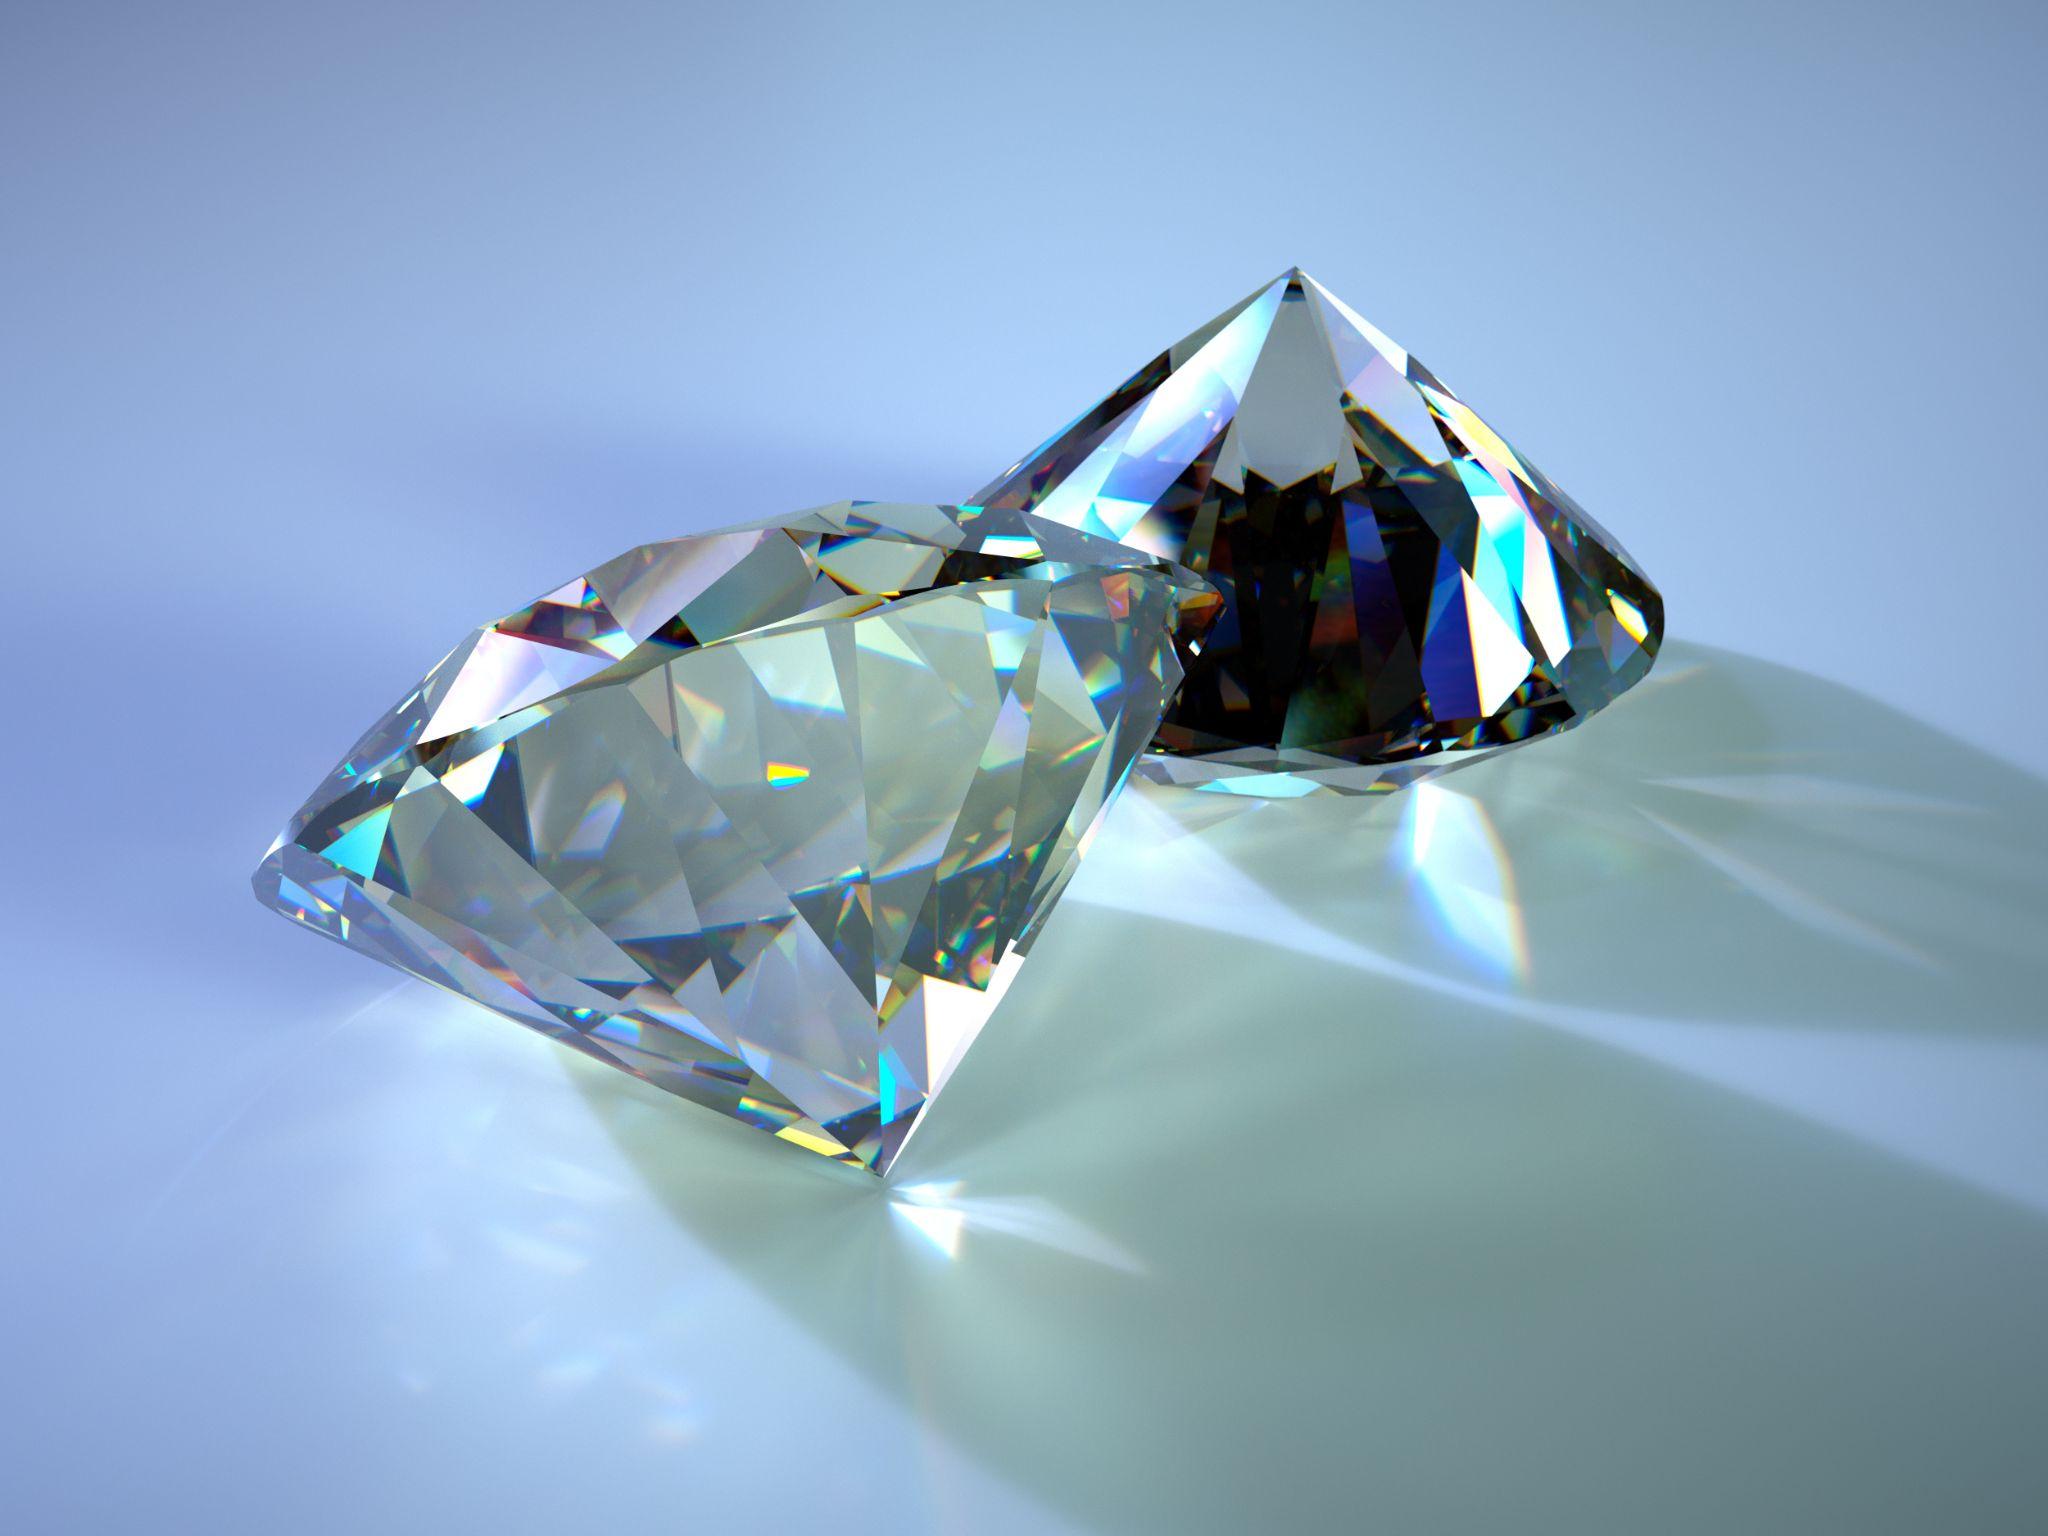 Two gems with caustics placed on blue plane